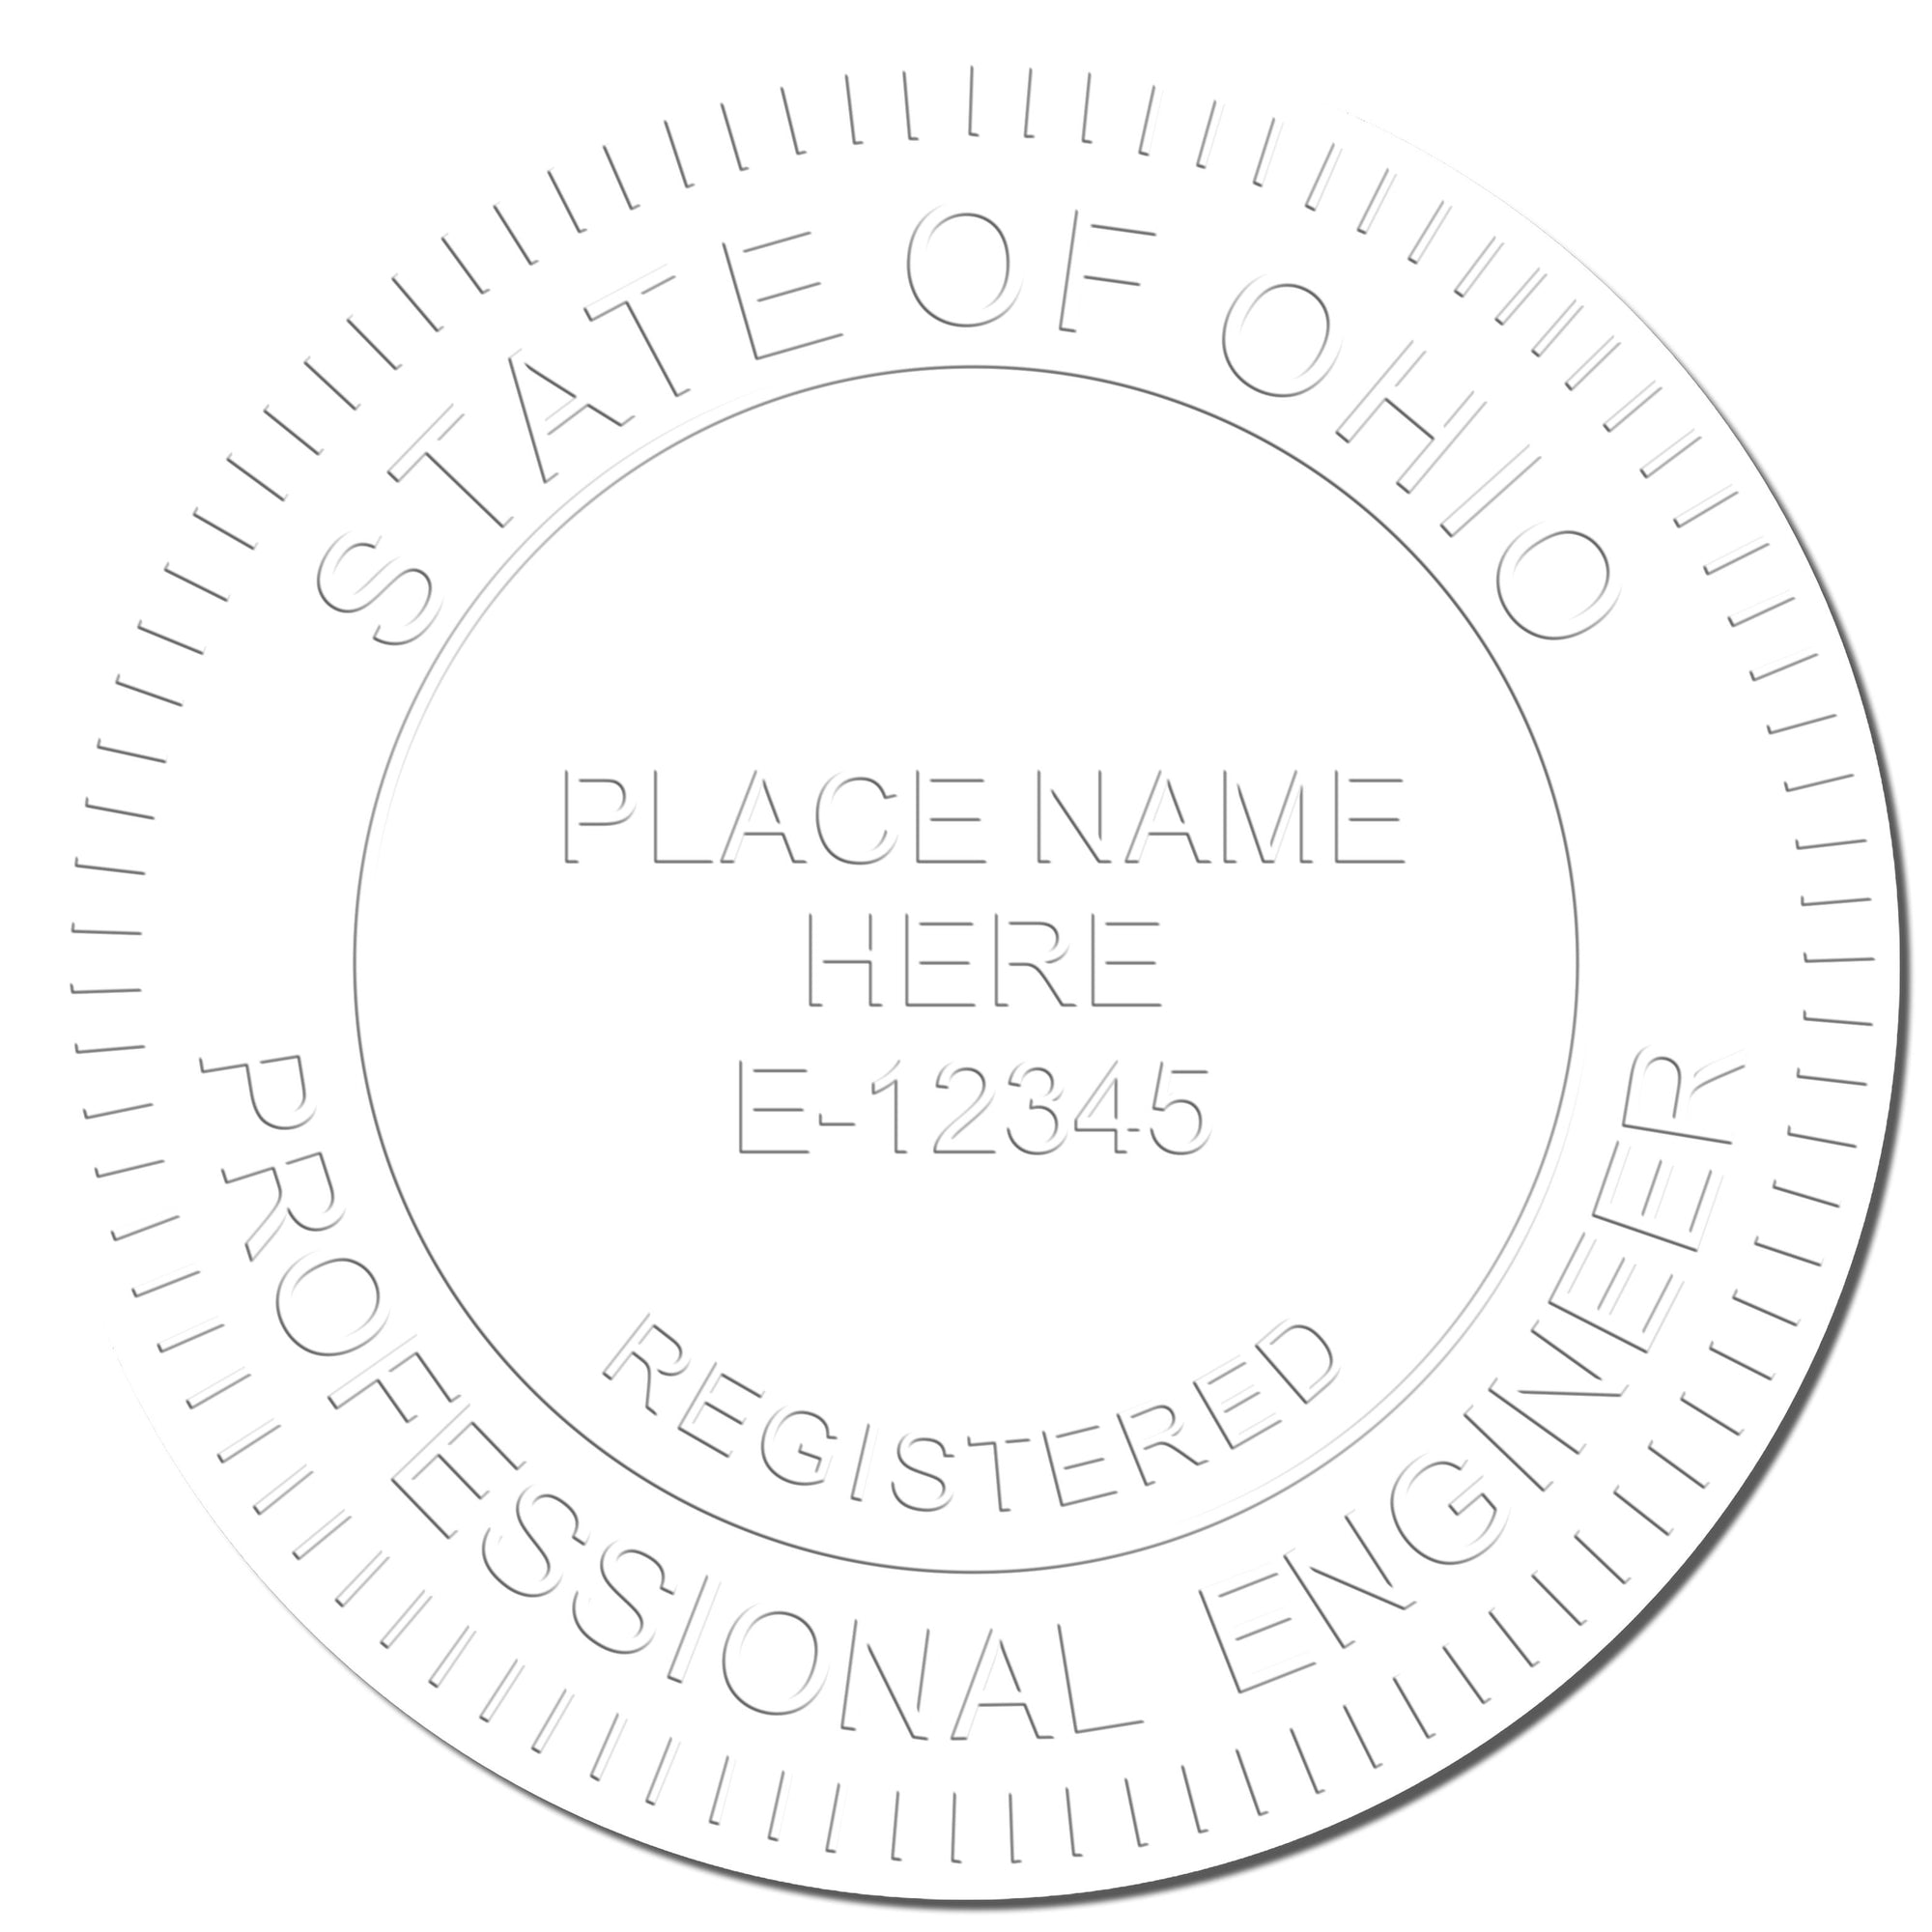 The main image for the Ohio Engineer Desk Seal depicting a sample of the imprint and electronic files